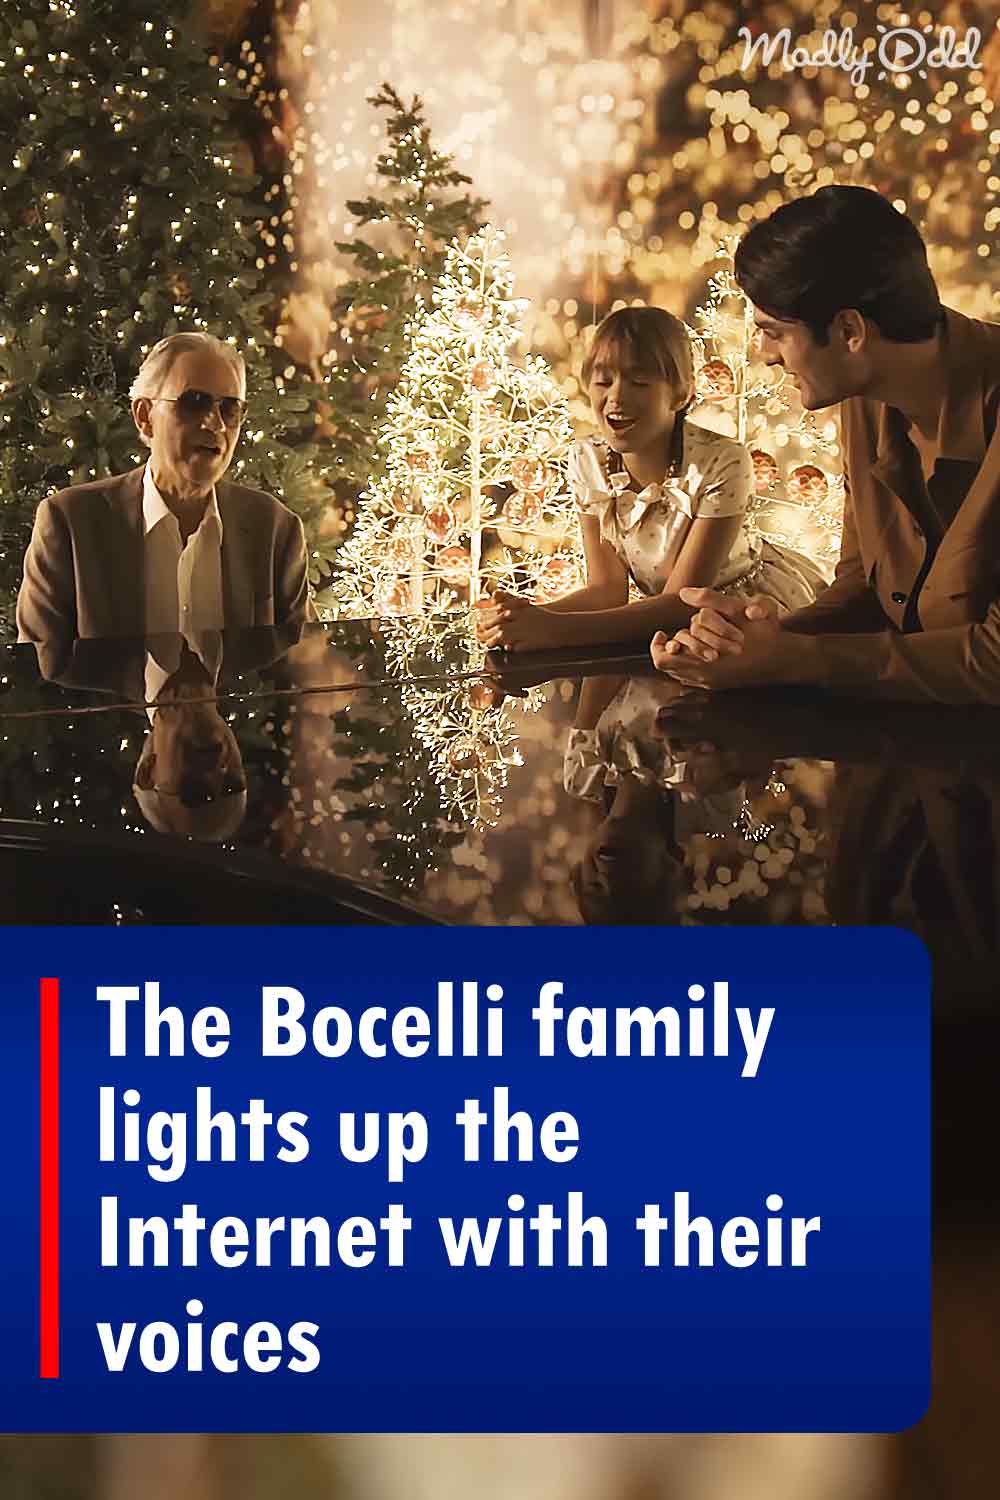 The Bocelli family lights up the Internet with their voices